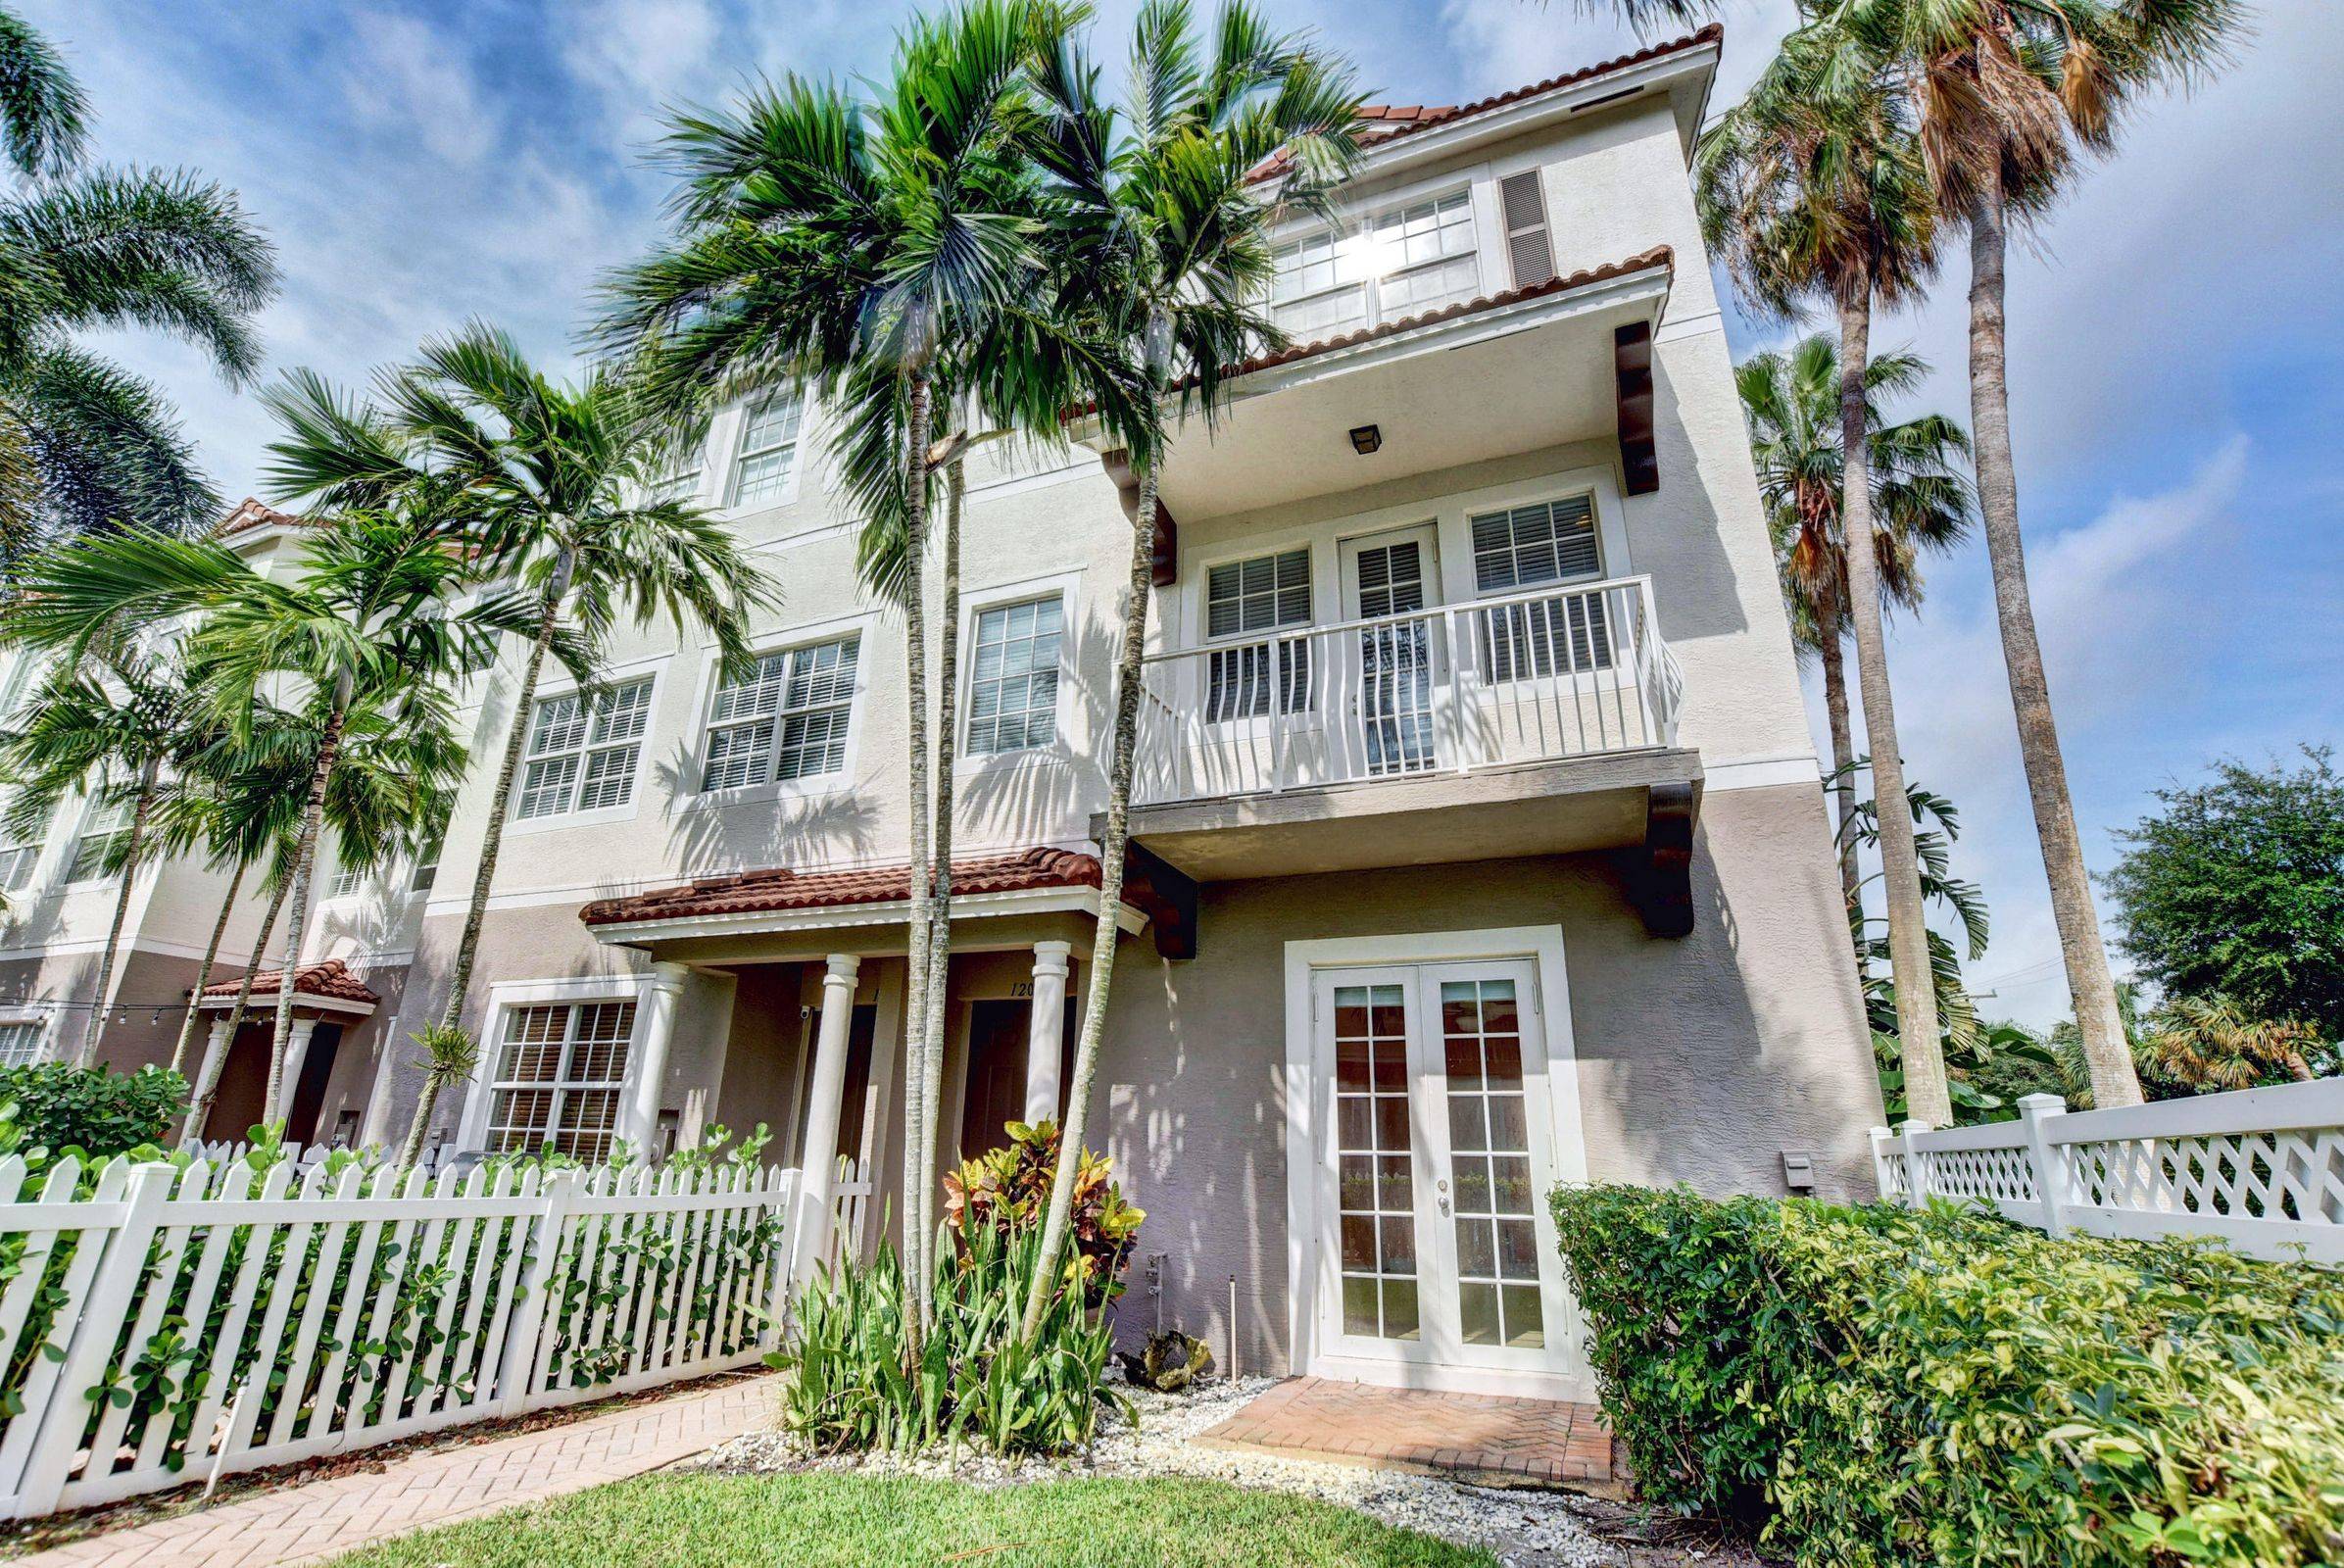 3 Story Townhome in Gated Community with Intracoastal Access